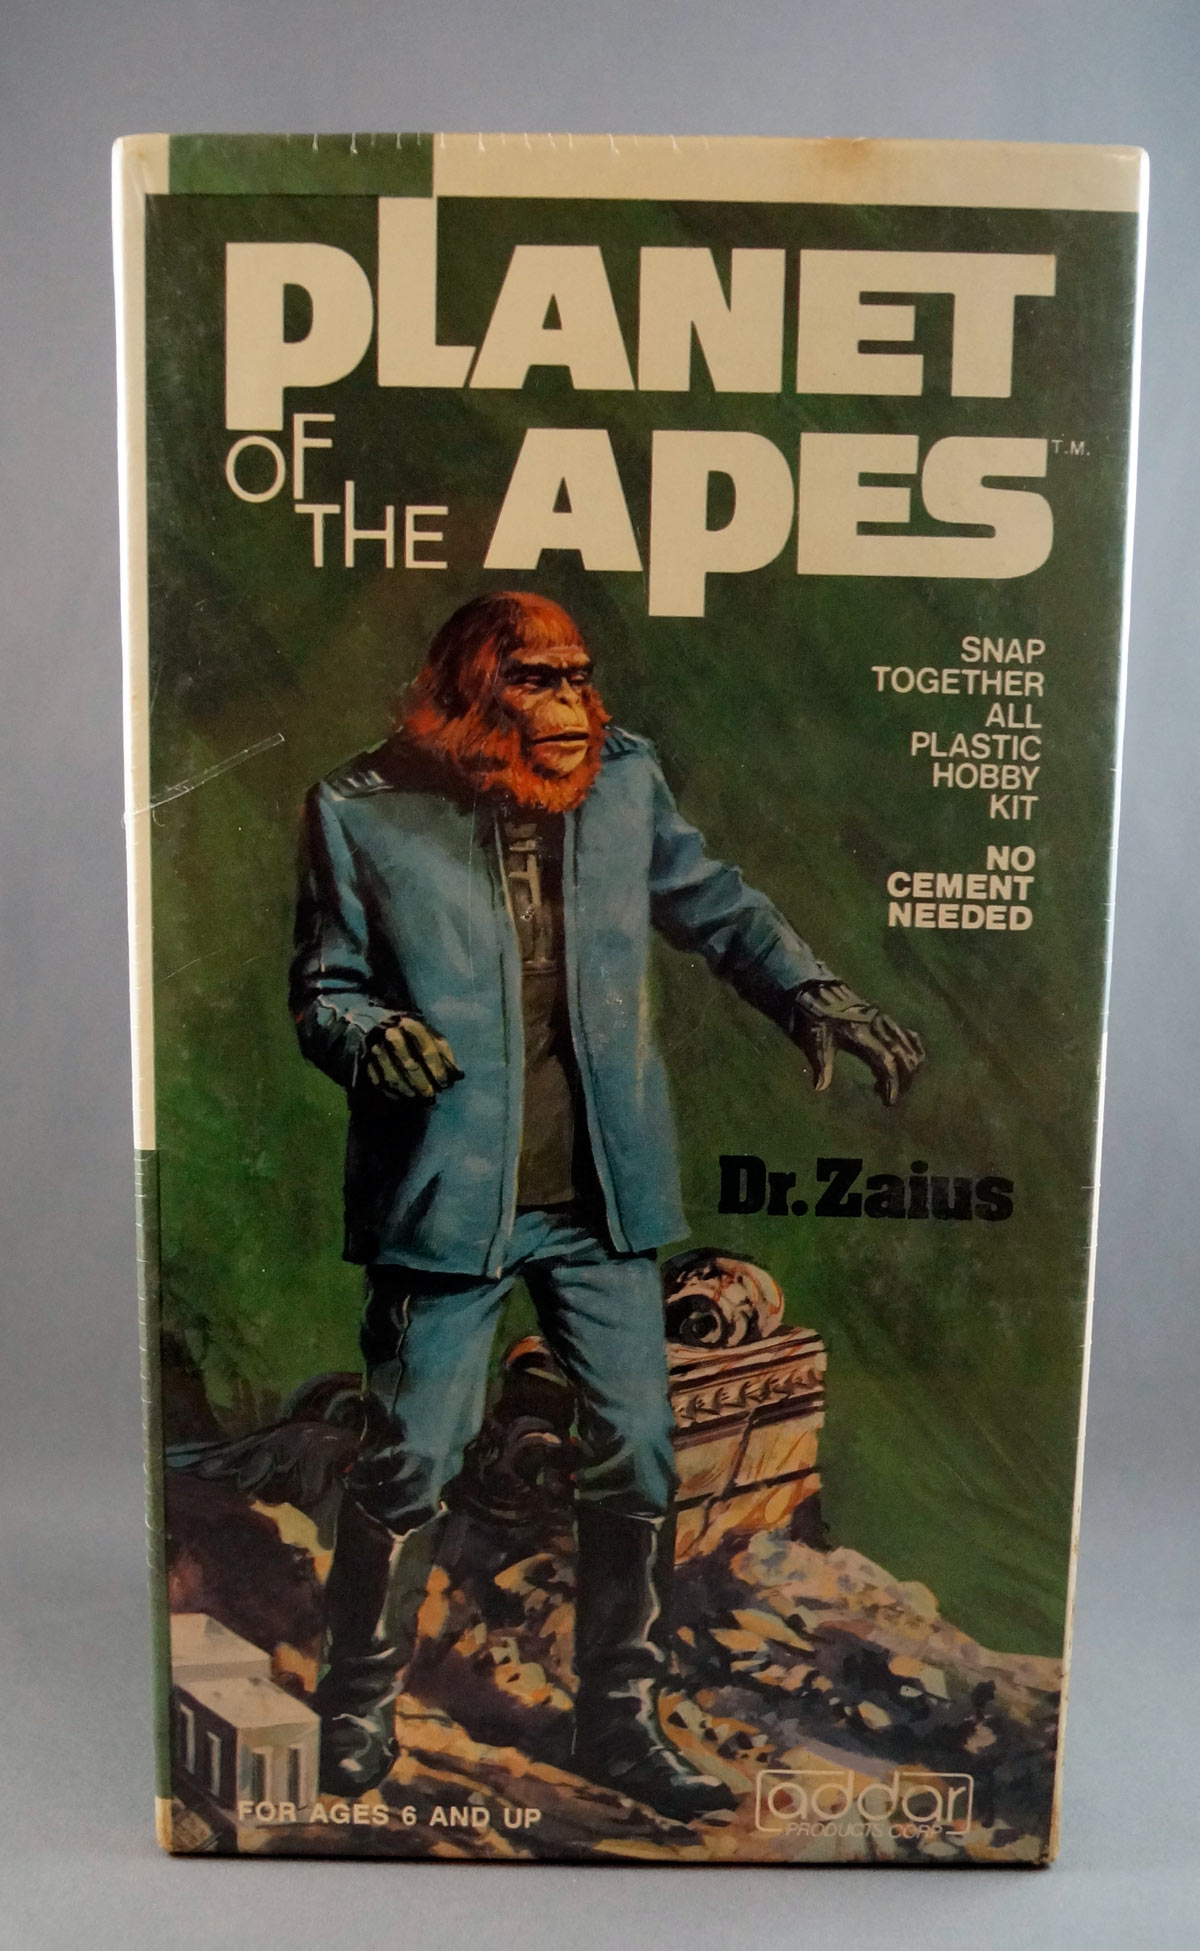 I love Addar Planet of the Apes model kits! – PS